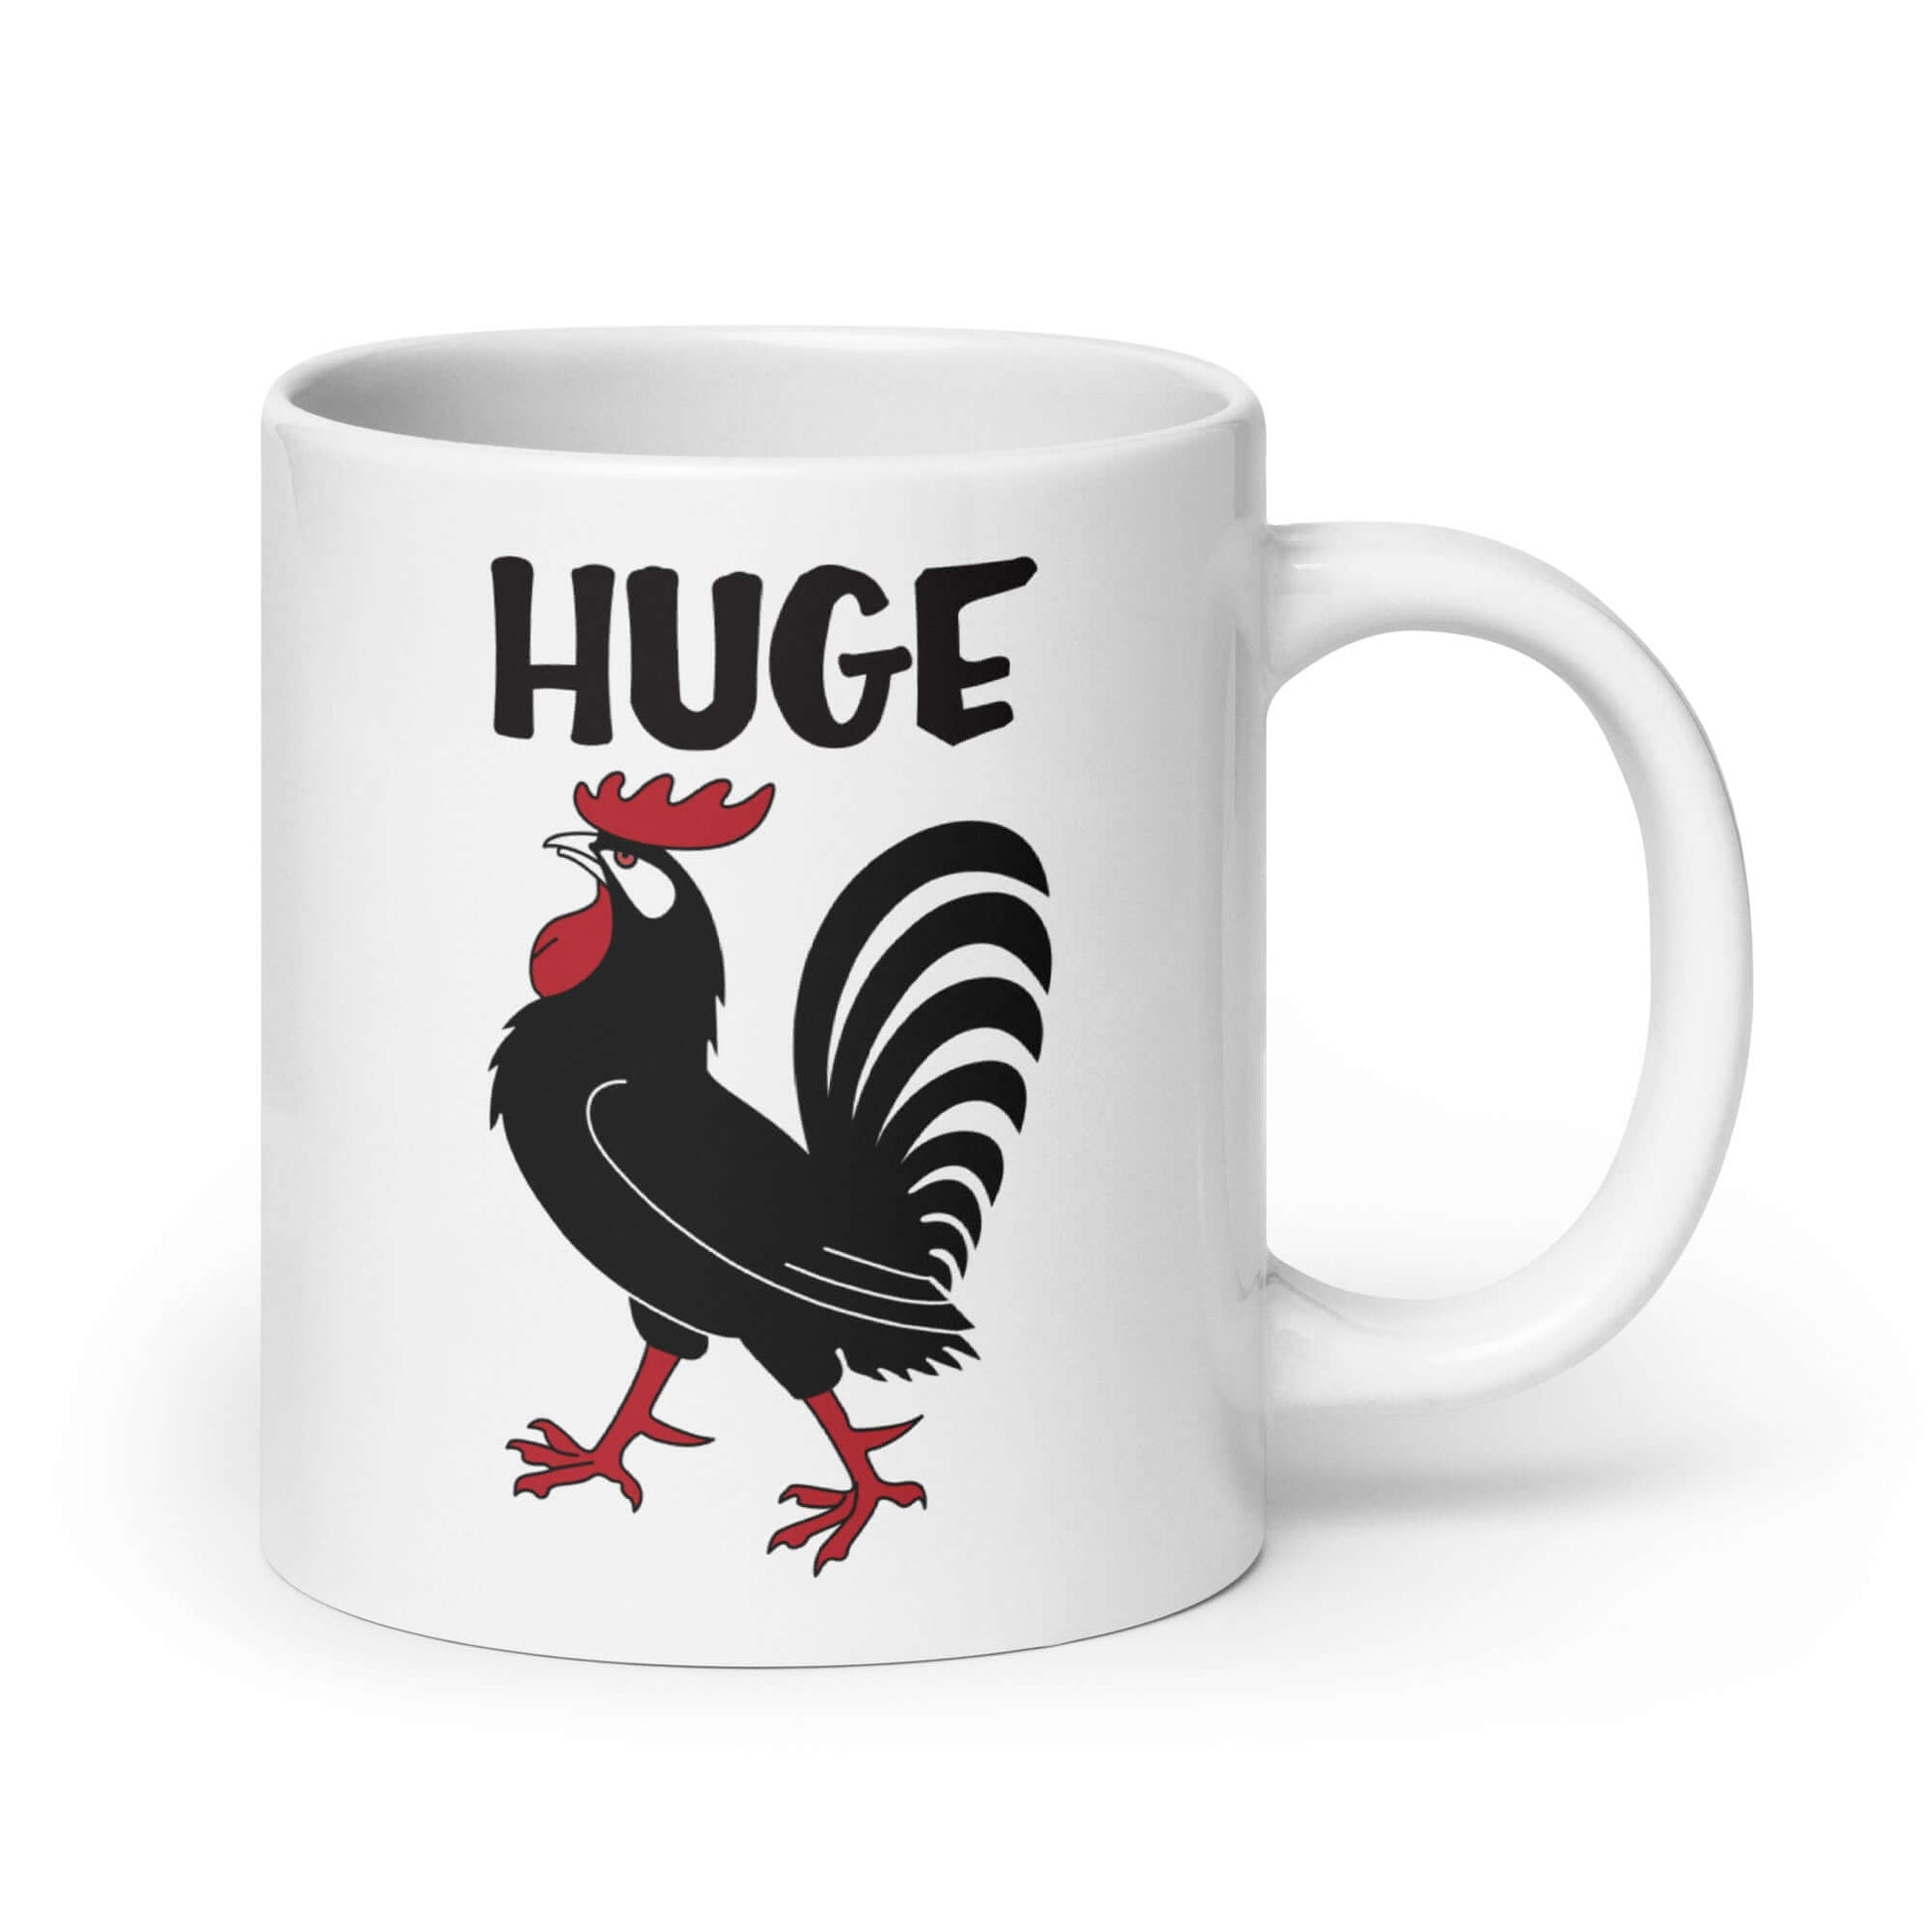 White ceramic mug with an image of a rooster and the word Huge above the rooster printed on both sides.